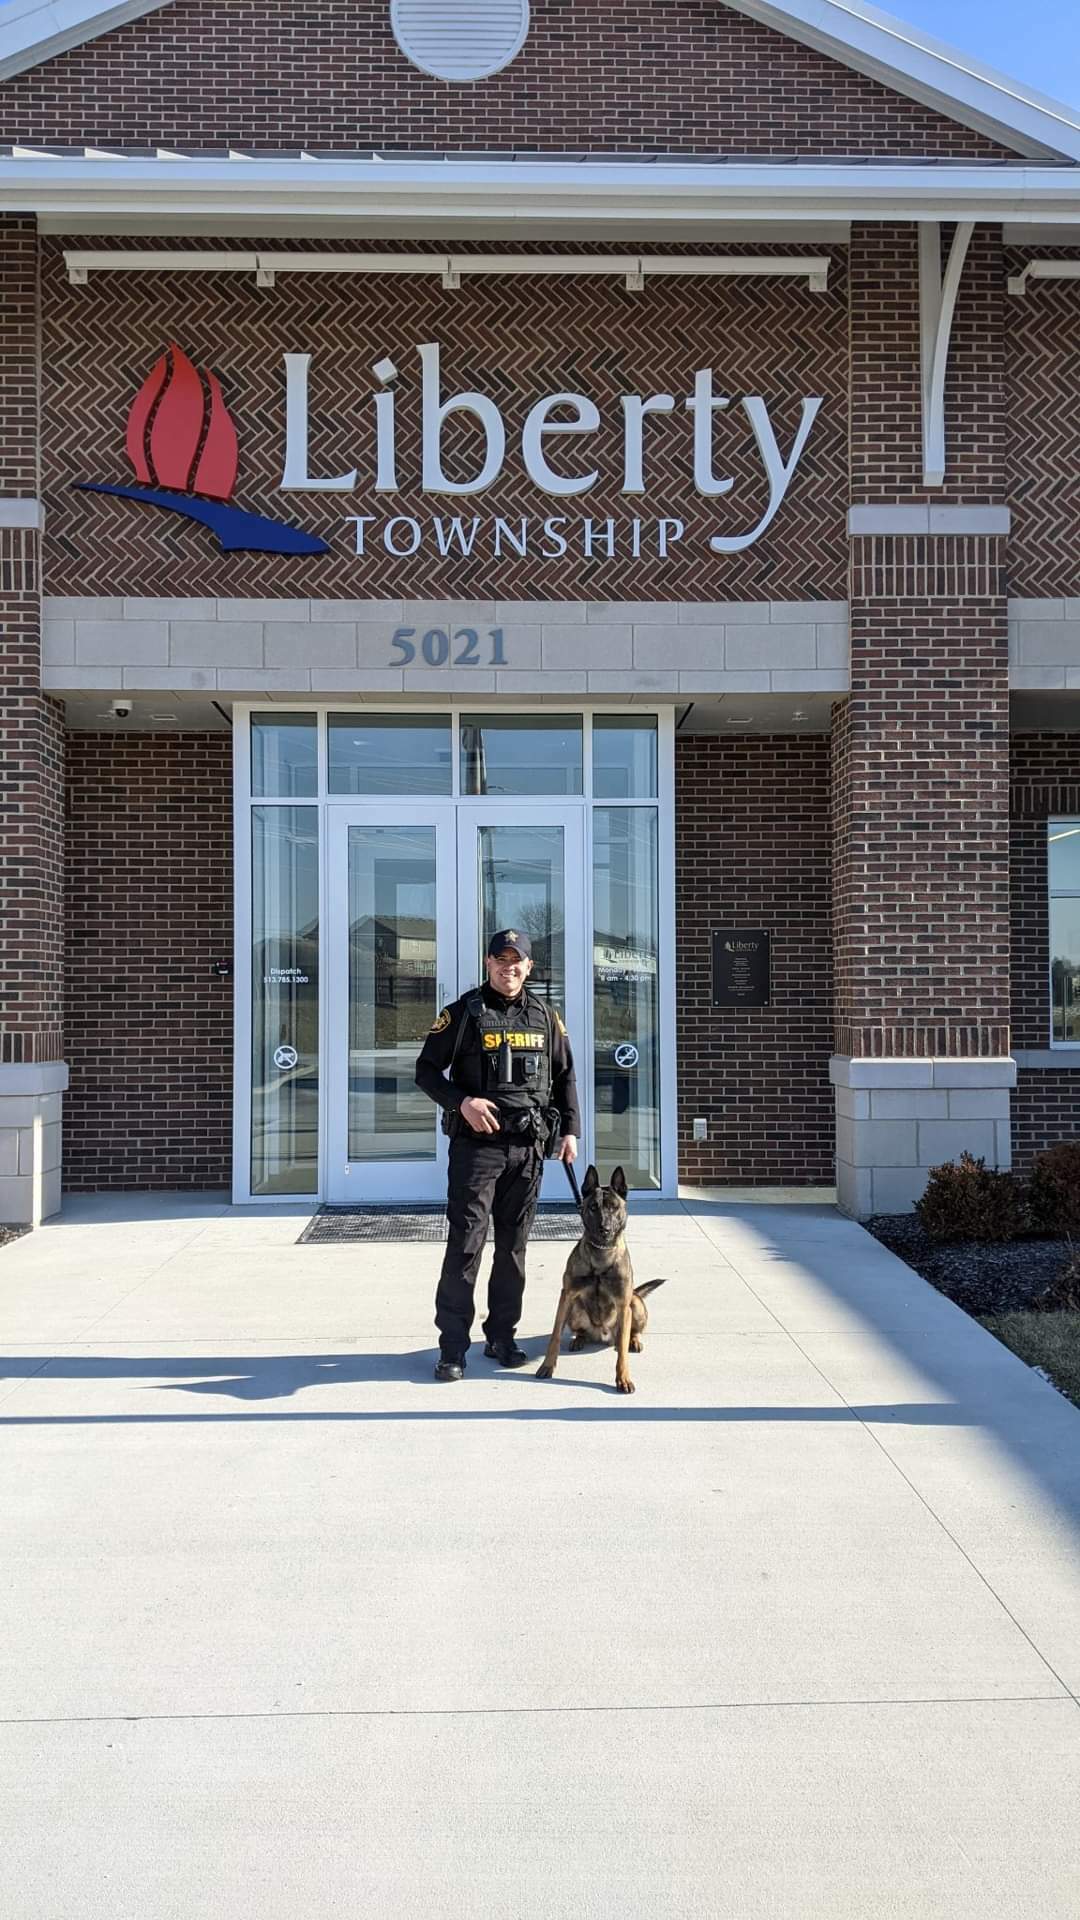 Police Officer with a dog